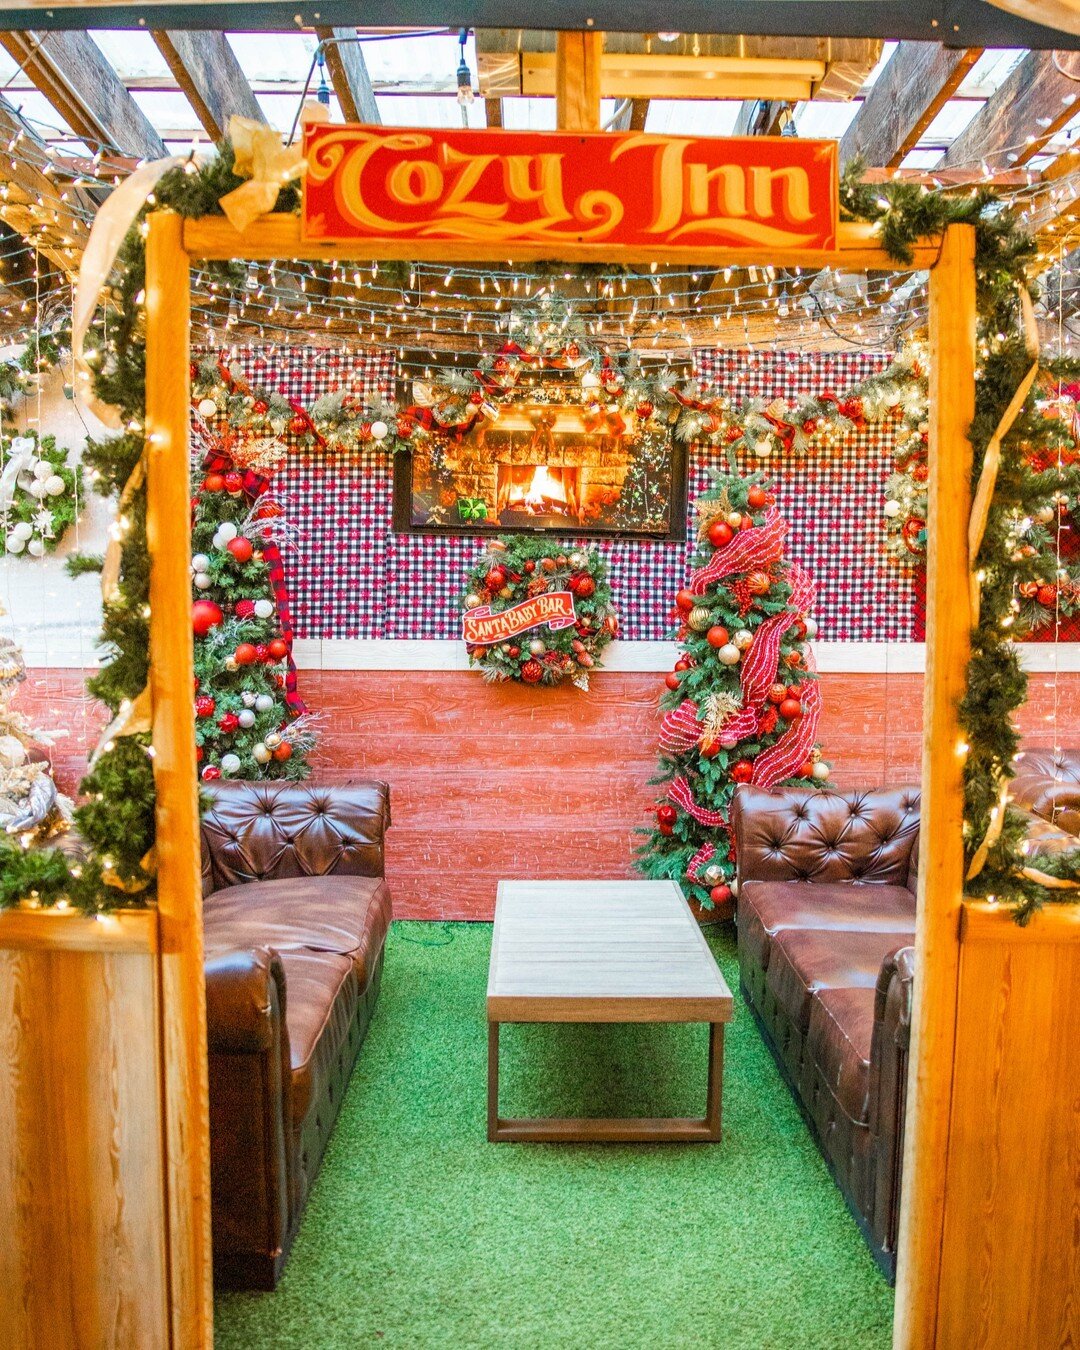 Get cozy and join us in one of our cabanas 🪵🔥🍻 Click the link in our bio to rent out a semi private space alongside our tented and fully heated patio!